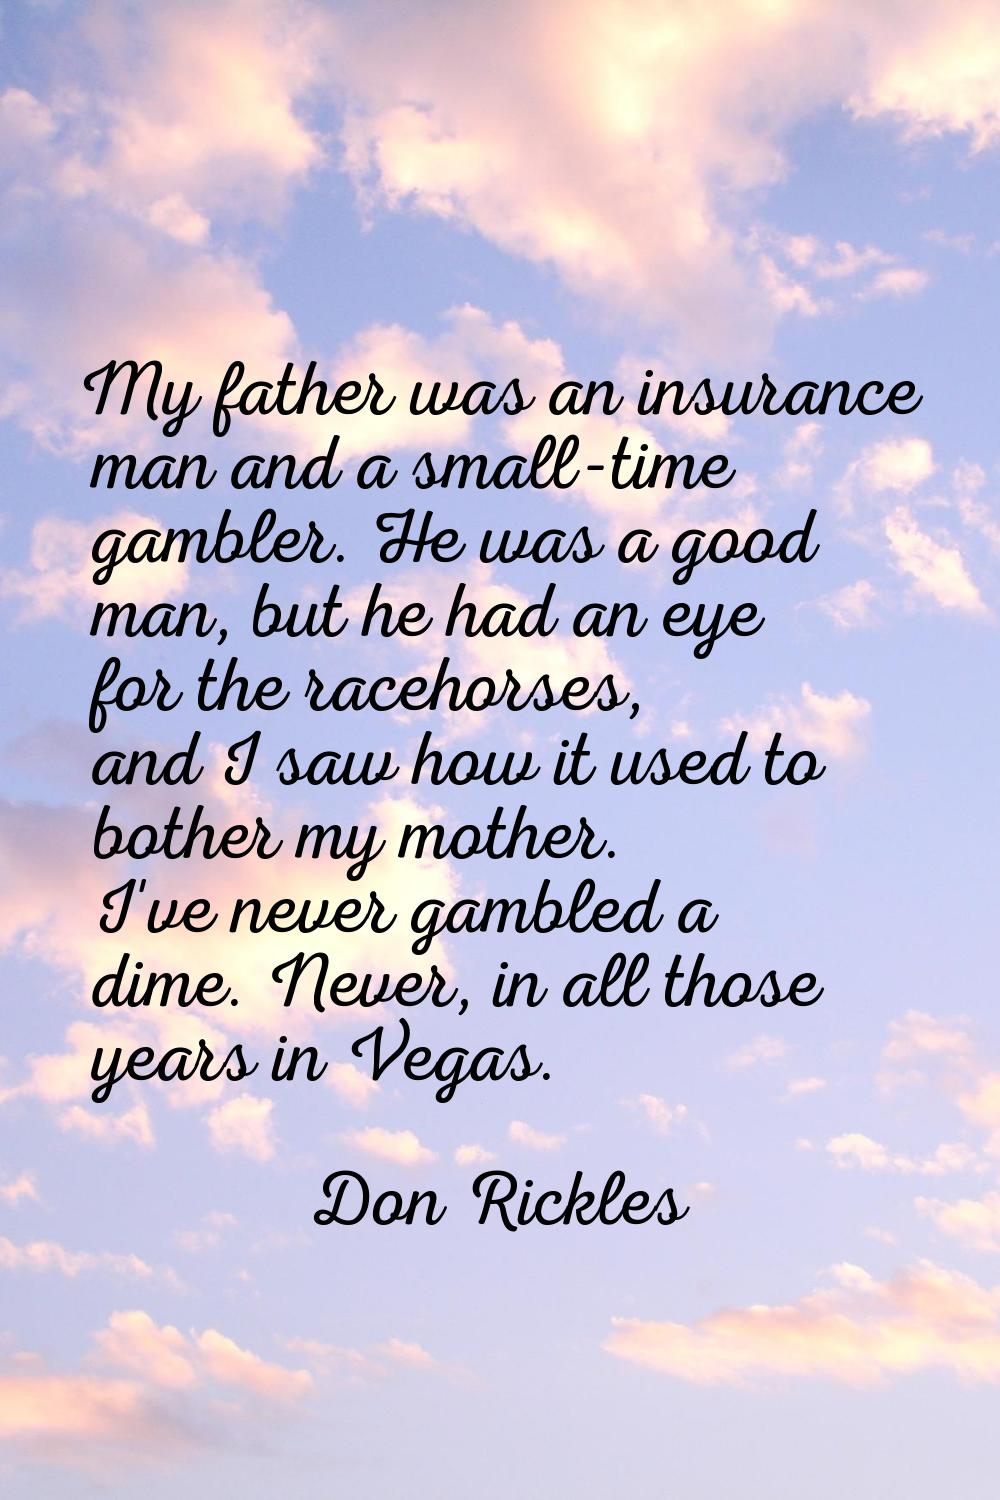 My father was an insurance man and a small-time gambler. He was a good man, but he had an eye for t